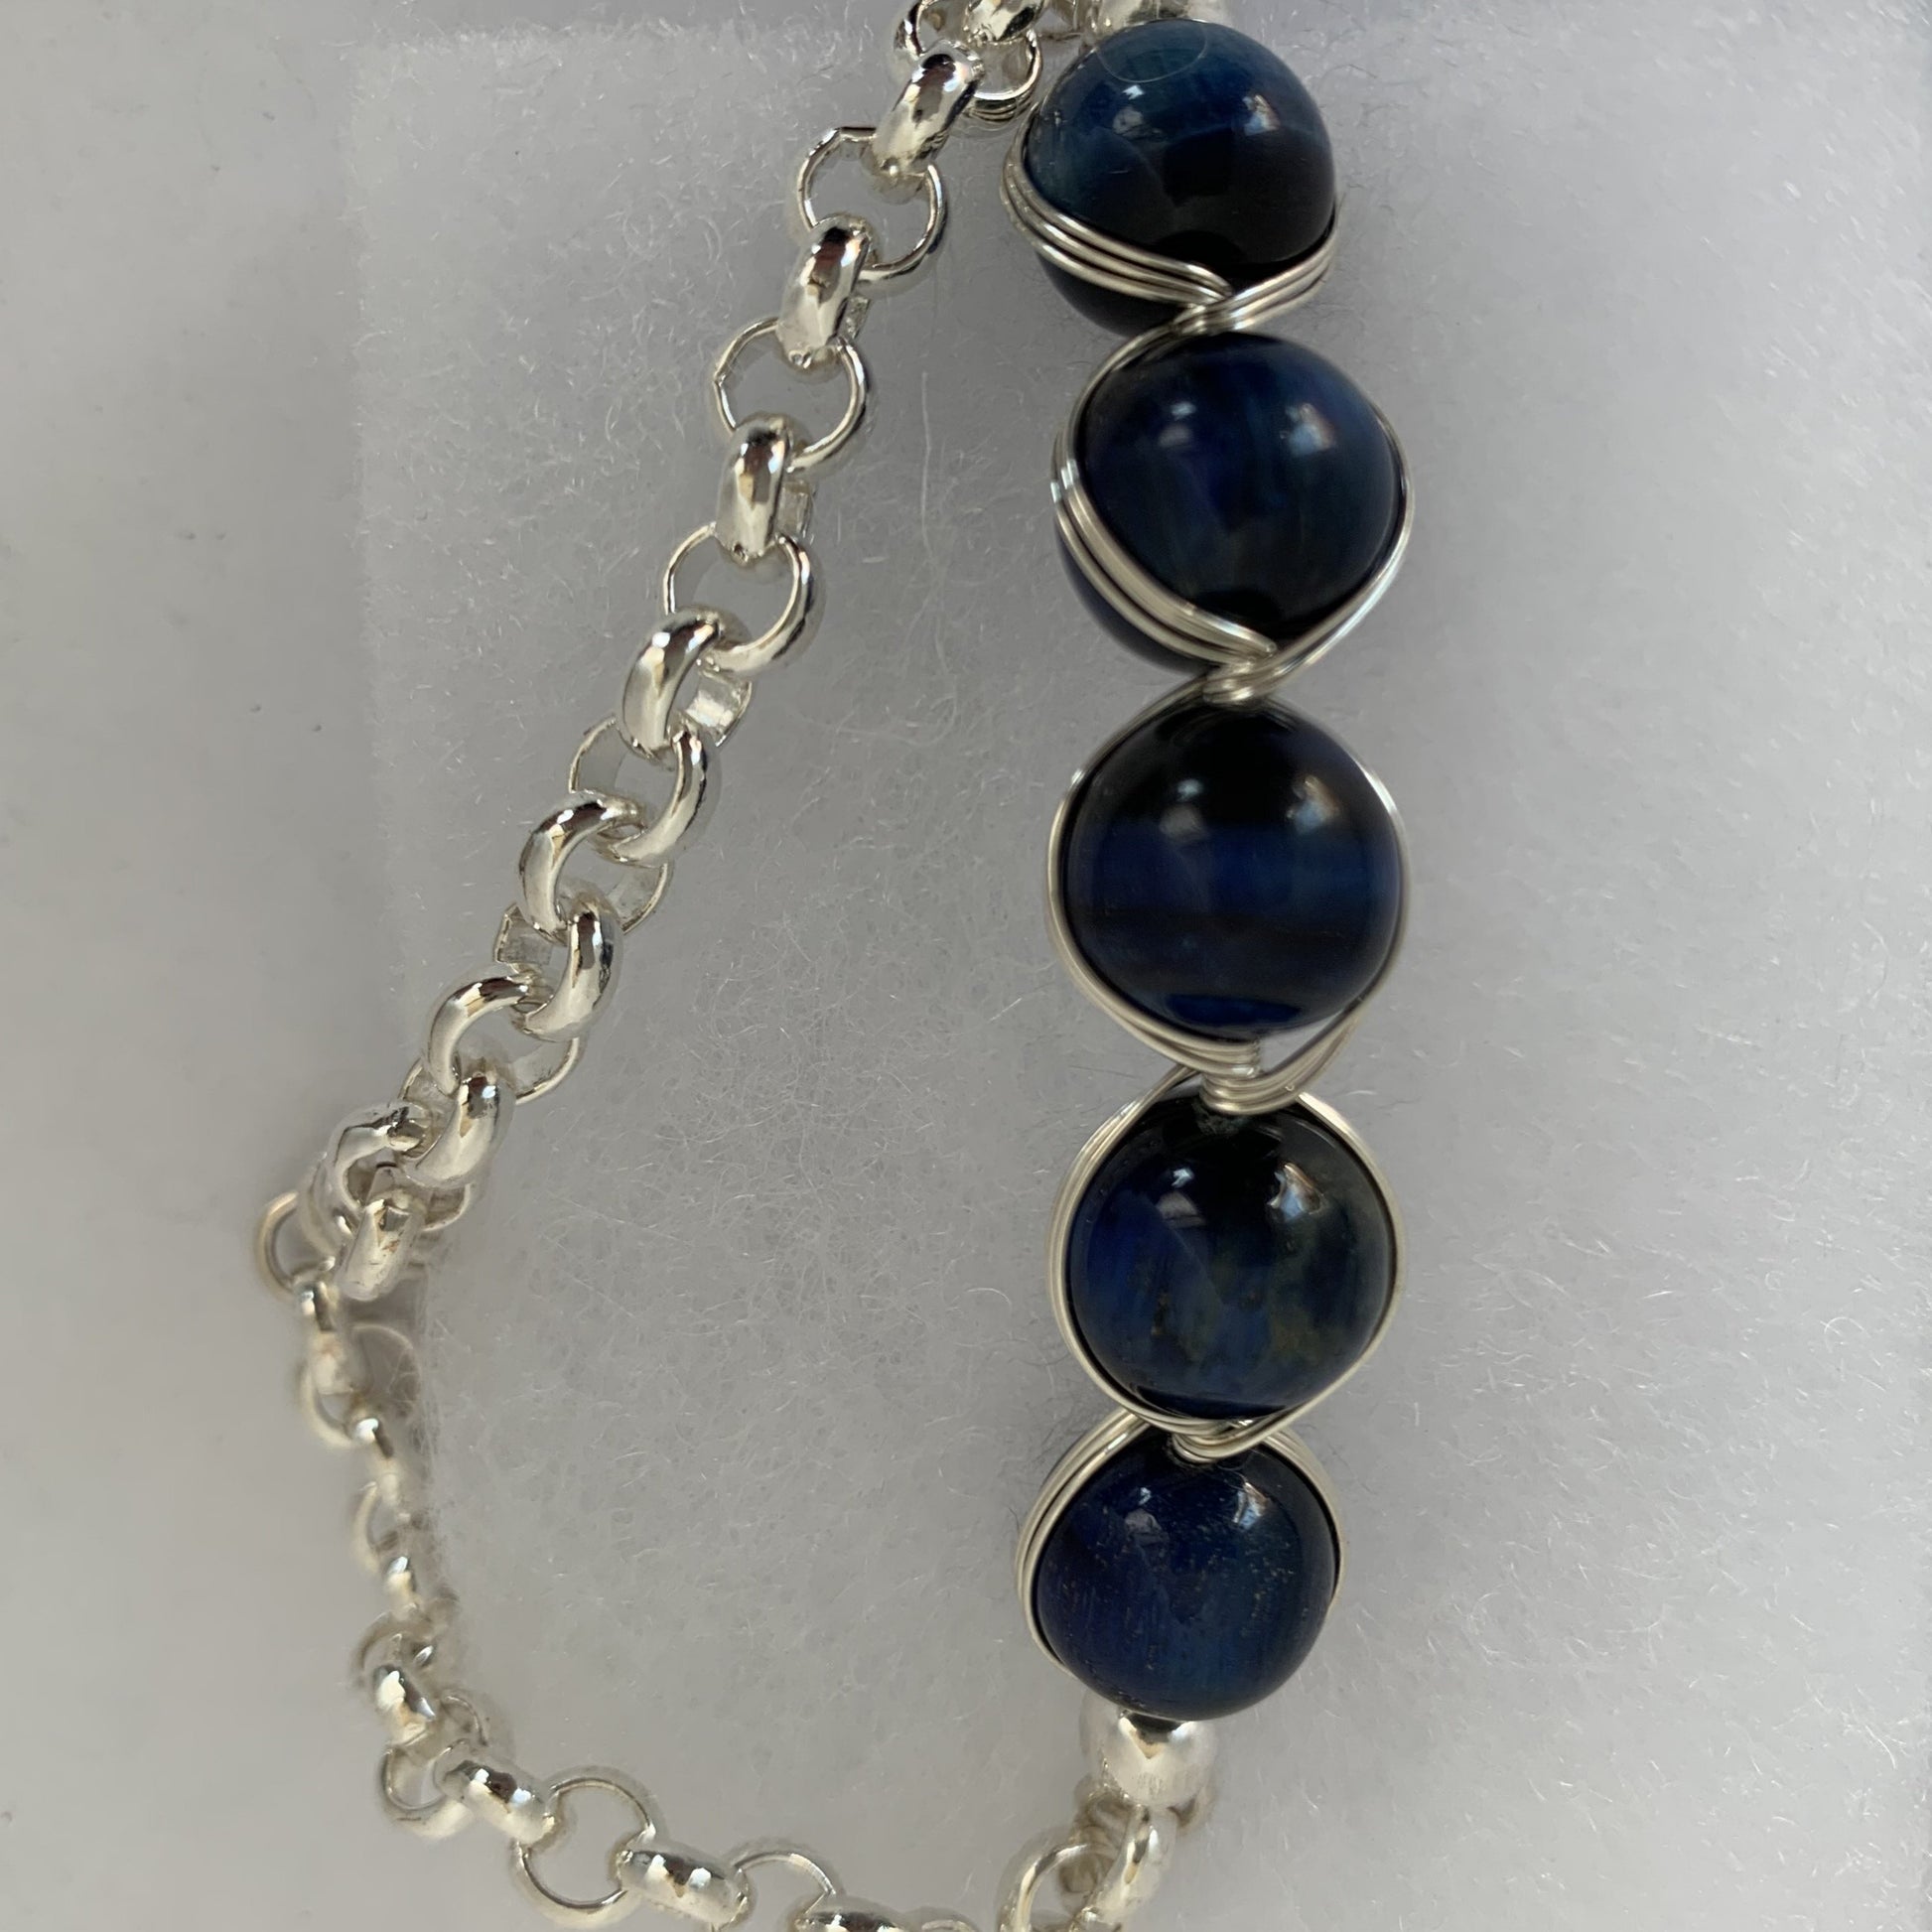 10mm blue tiger eye beads with Egyptian style sterling silver wire wrapped with silver plated on stainless steel tool chain and magnetic clasp